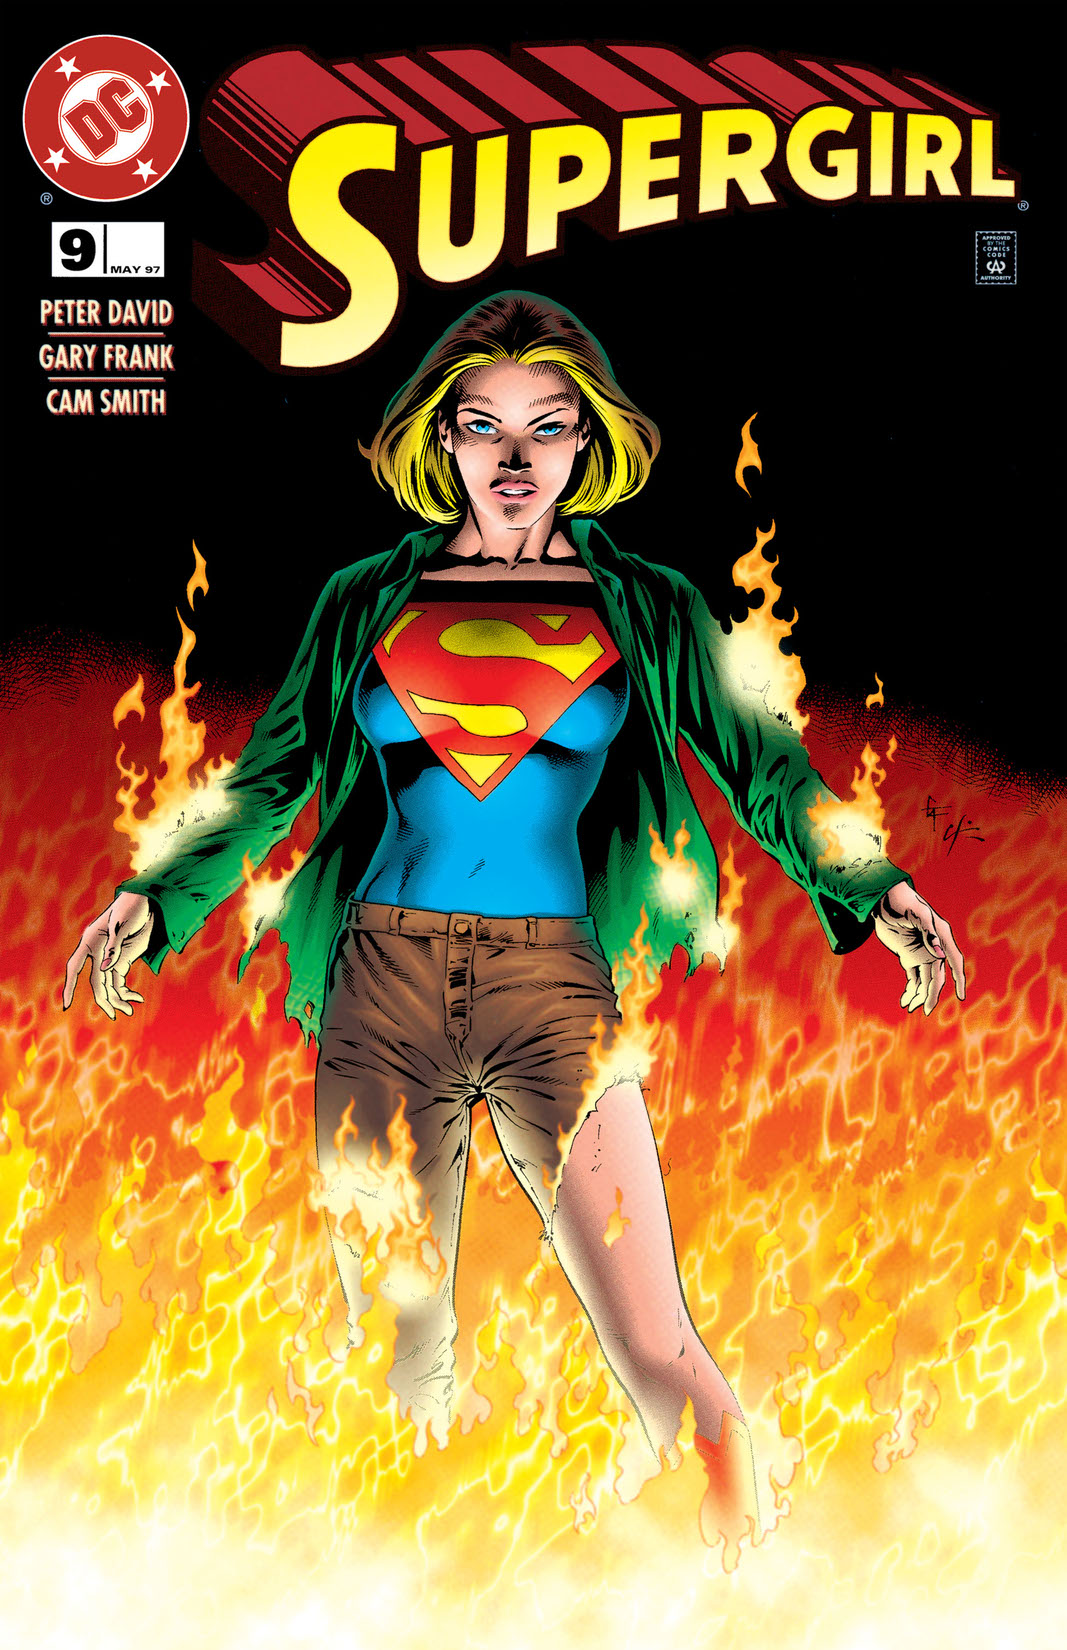 Supergirl (1996-) #9 preview images